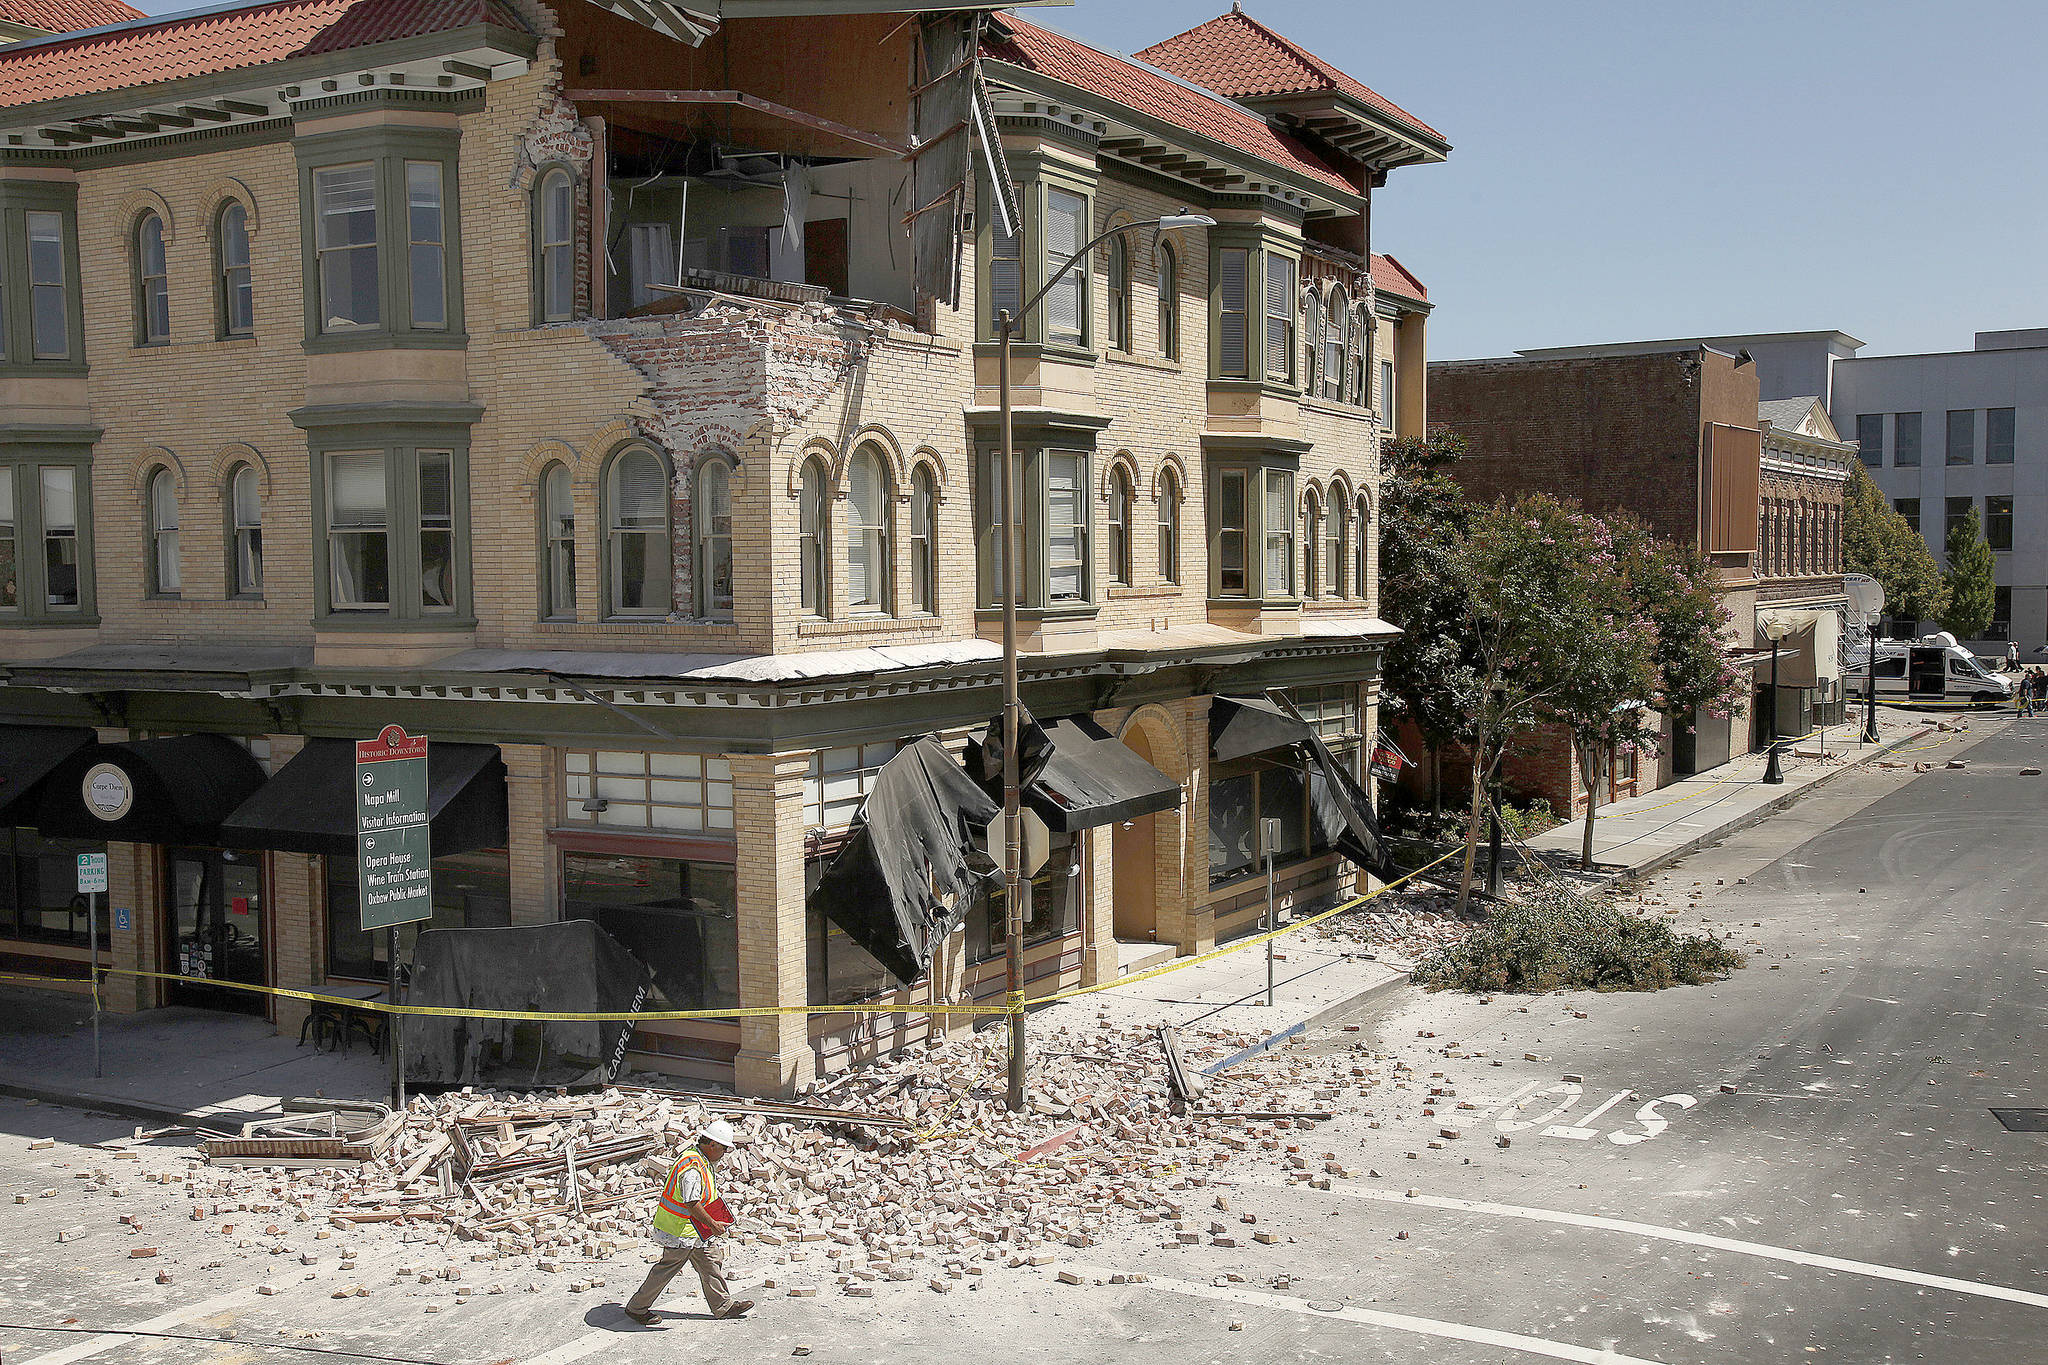 Damage in downtown Napa after a magnitude 6 earthquake struck the area in August 2014. (Rick Loomis/Los Angeles Times/TNS)